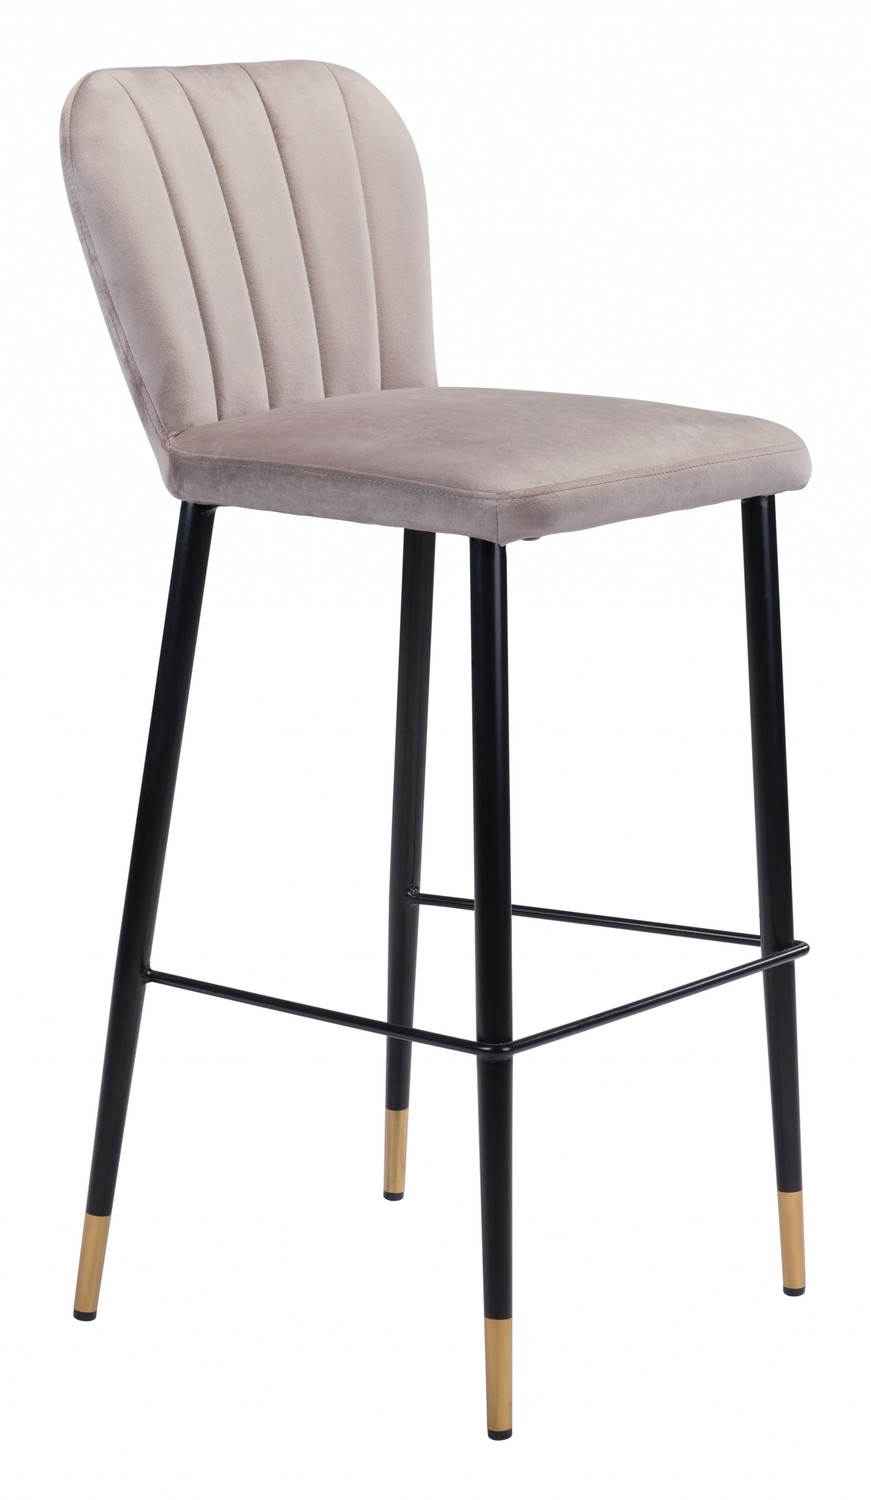 Gray and Black Mod Low Profile Bar Chair